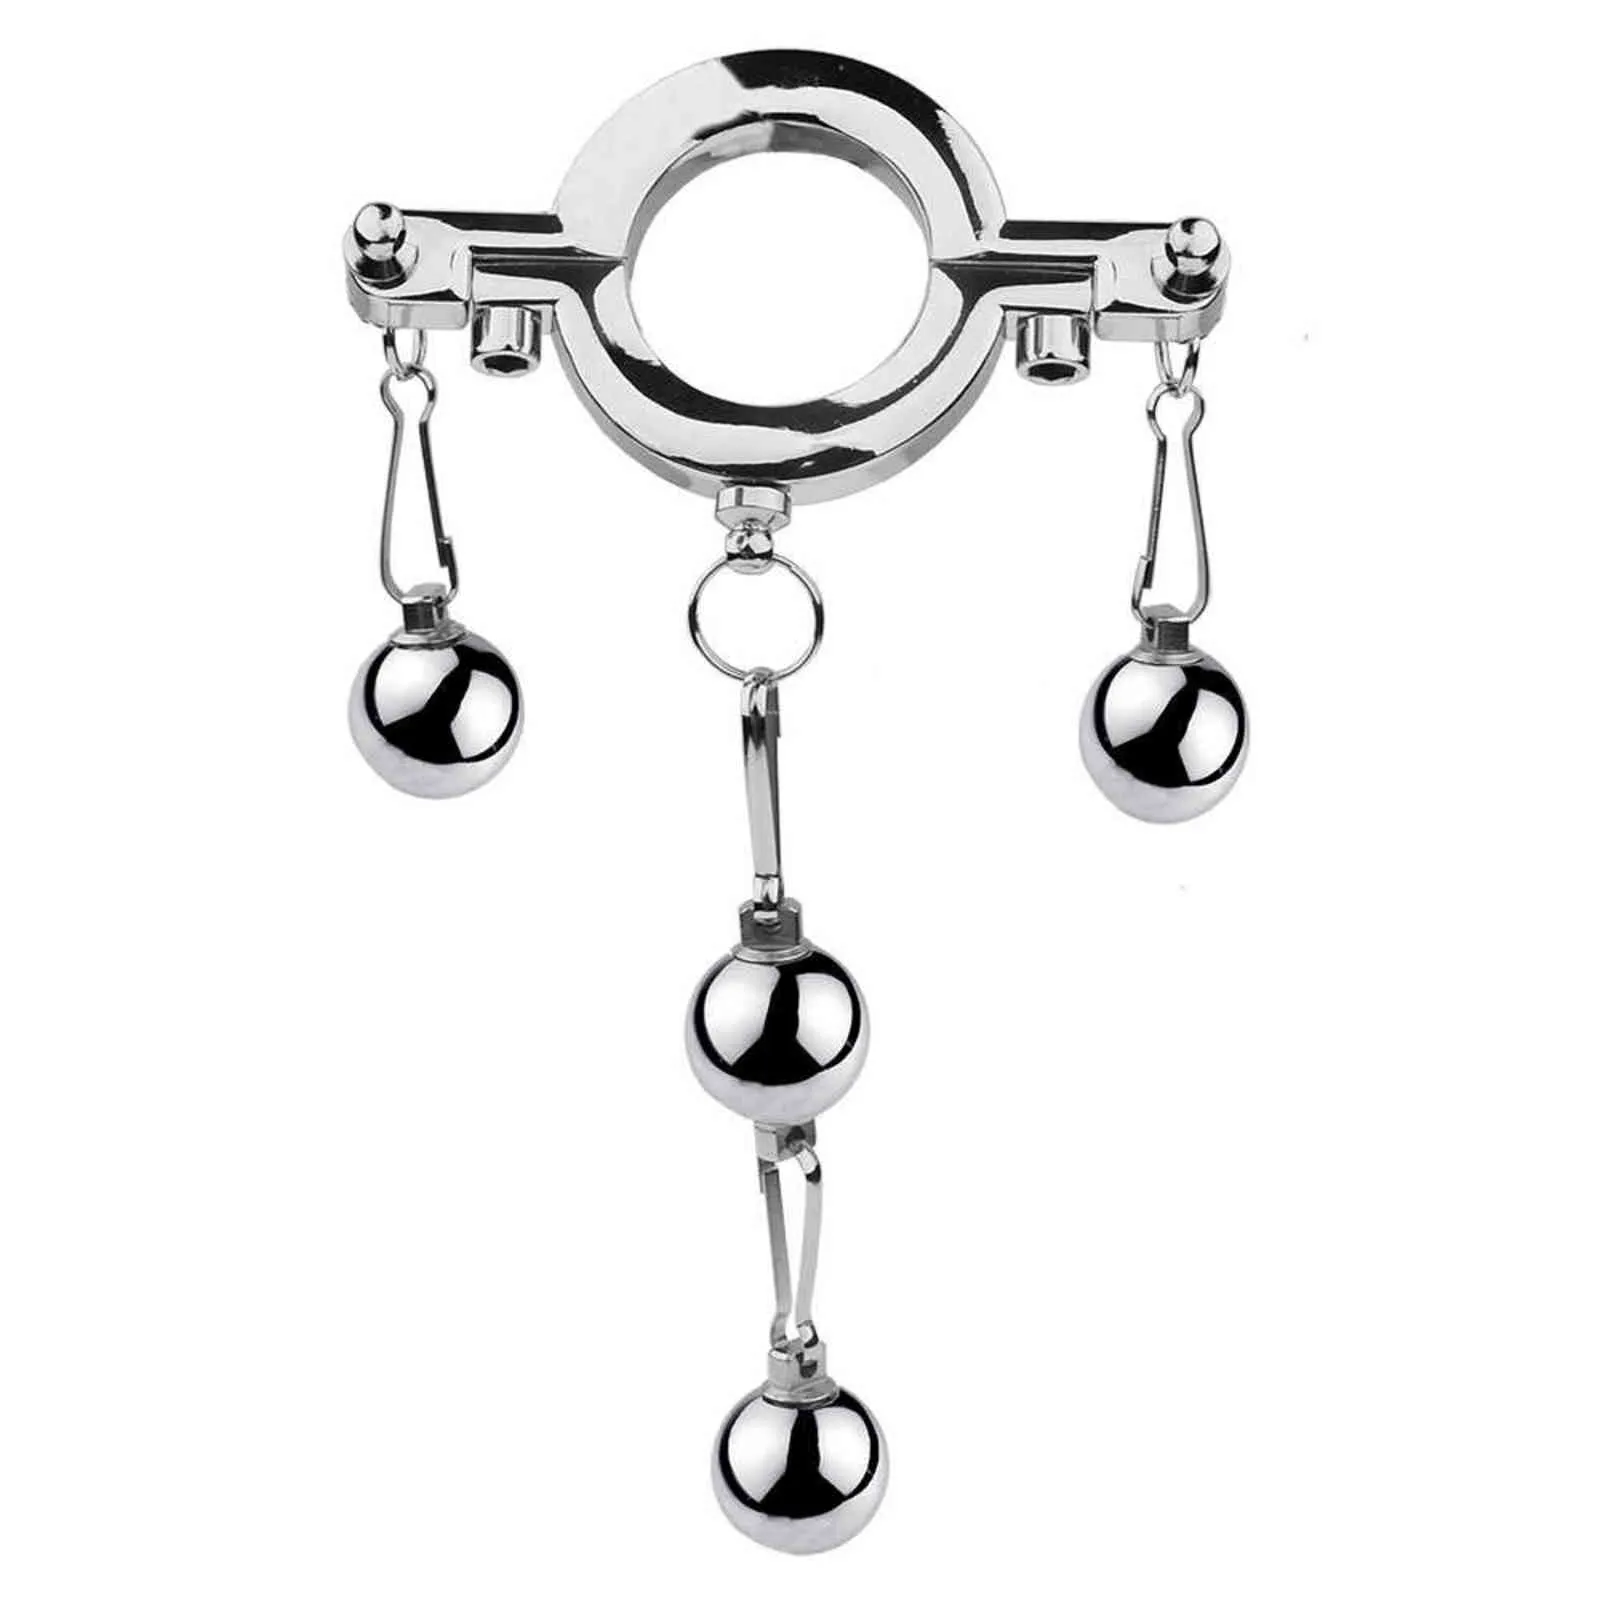 NXYCockrings Drop Ball Penis Ring Metal Weight Hanger l'ingrandimento della barella Extender Cock Chastity Device YS0437 1124